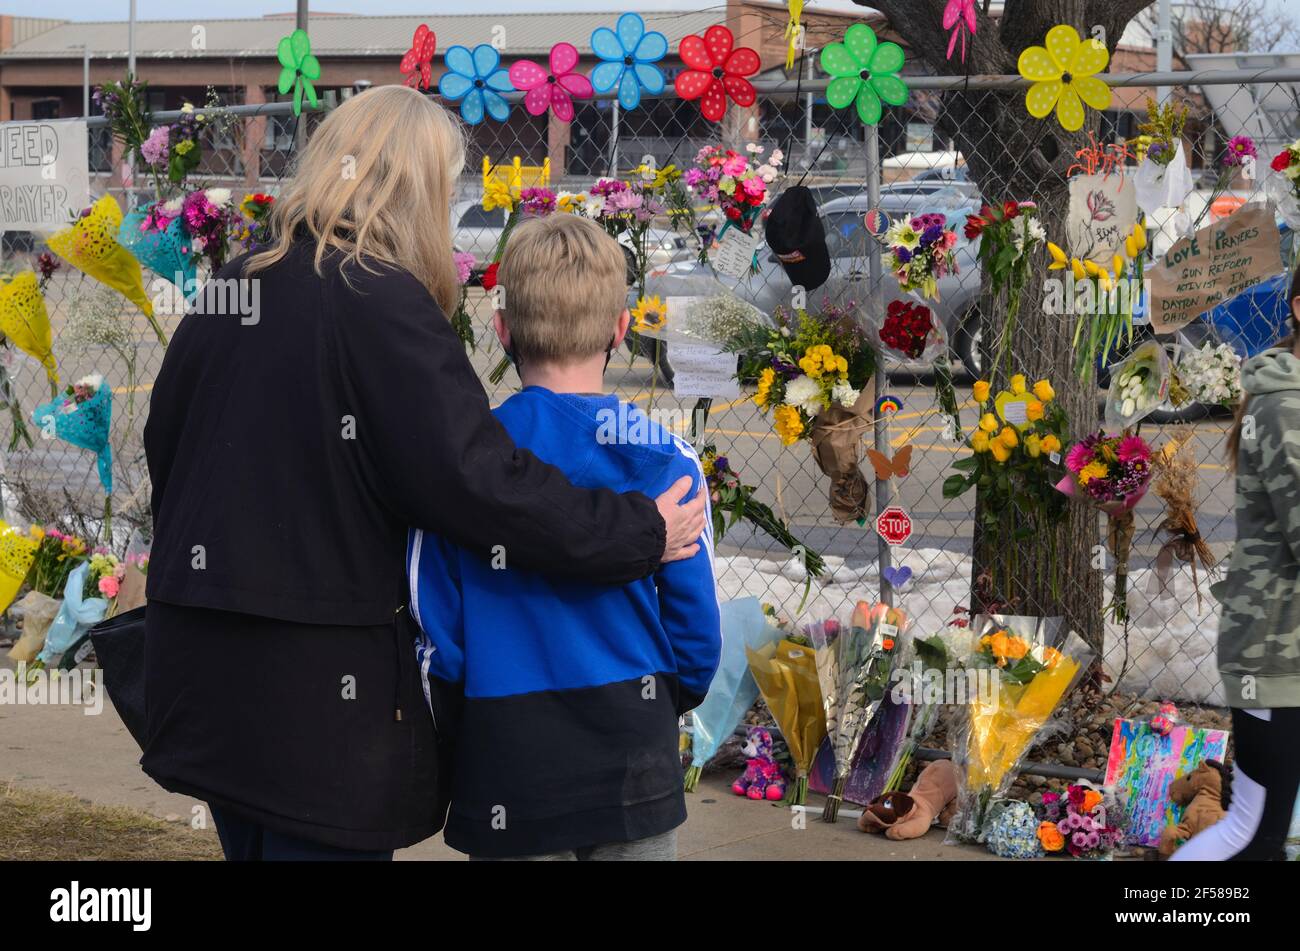 Ten people at King Soopers grocery in Boulder CO were killed by a single gunman, March 22, 2021. Much grief was expressed at this memorial fence. Stock Photo